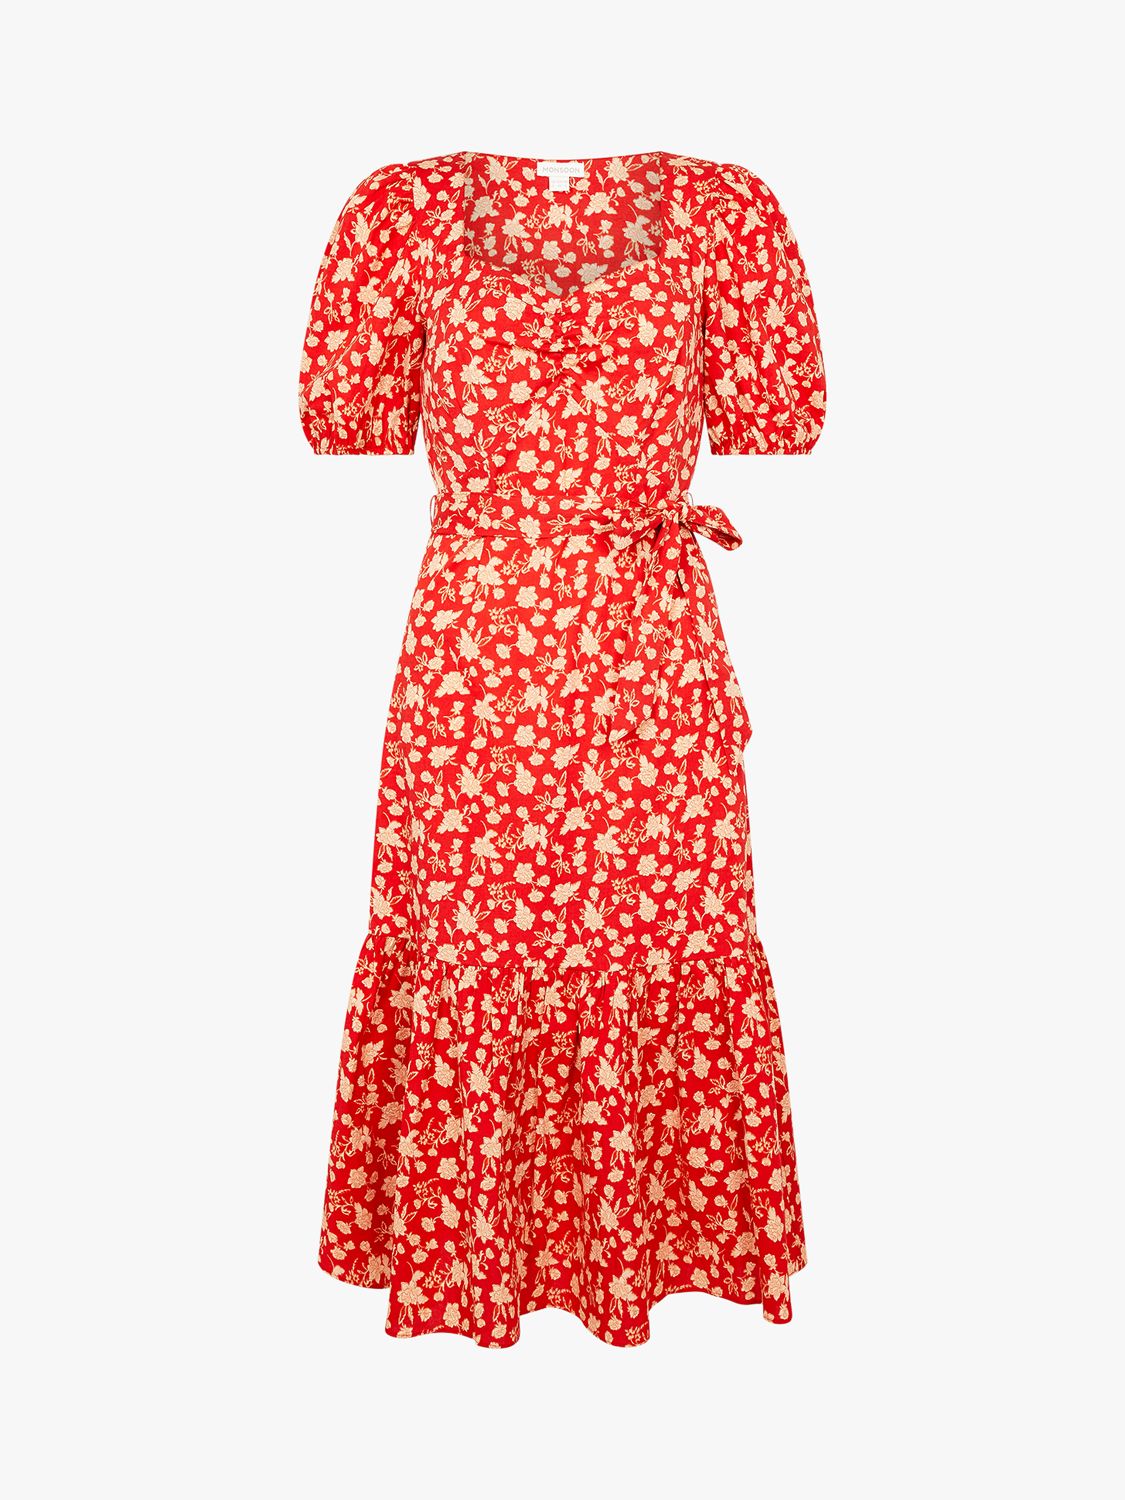 Monsoon Floral Print Tiered Midi Dress, Red at John Lewis & Partners